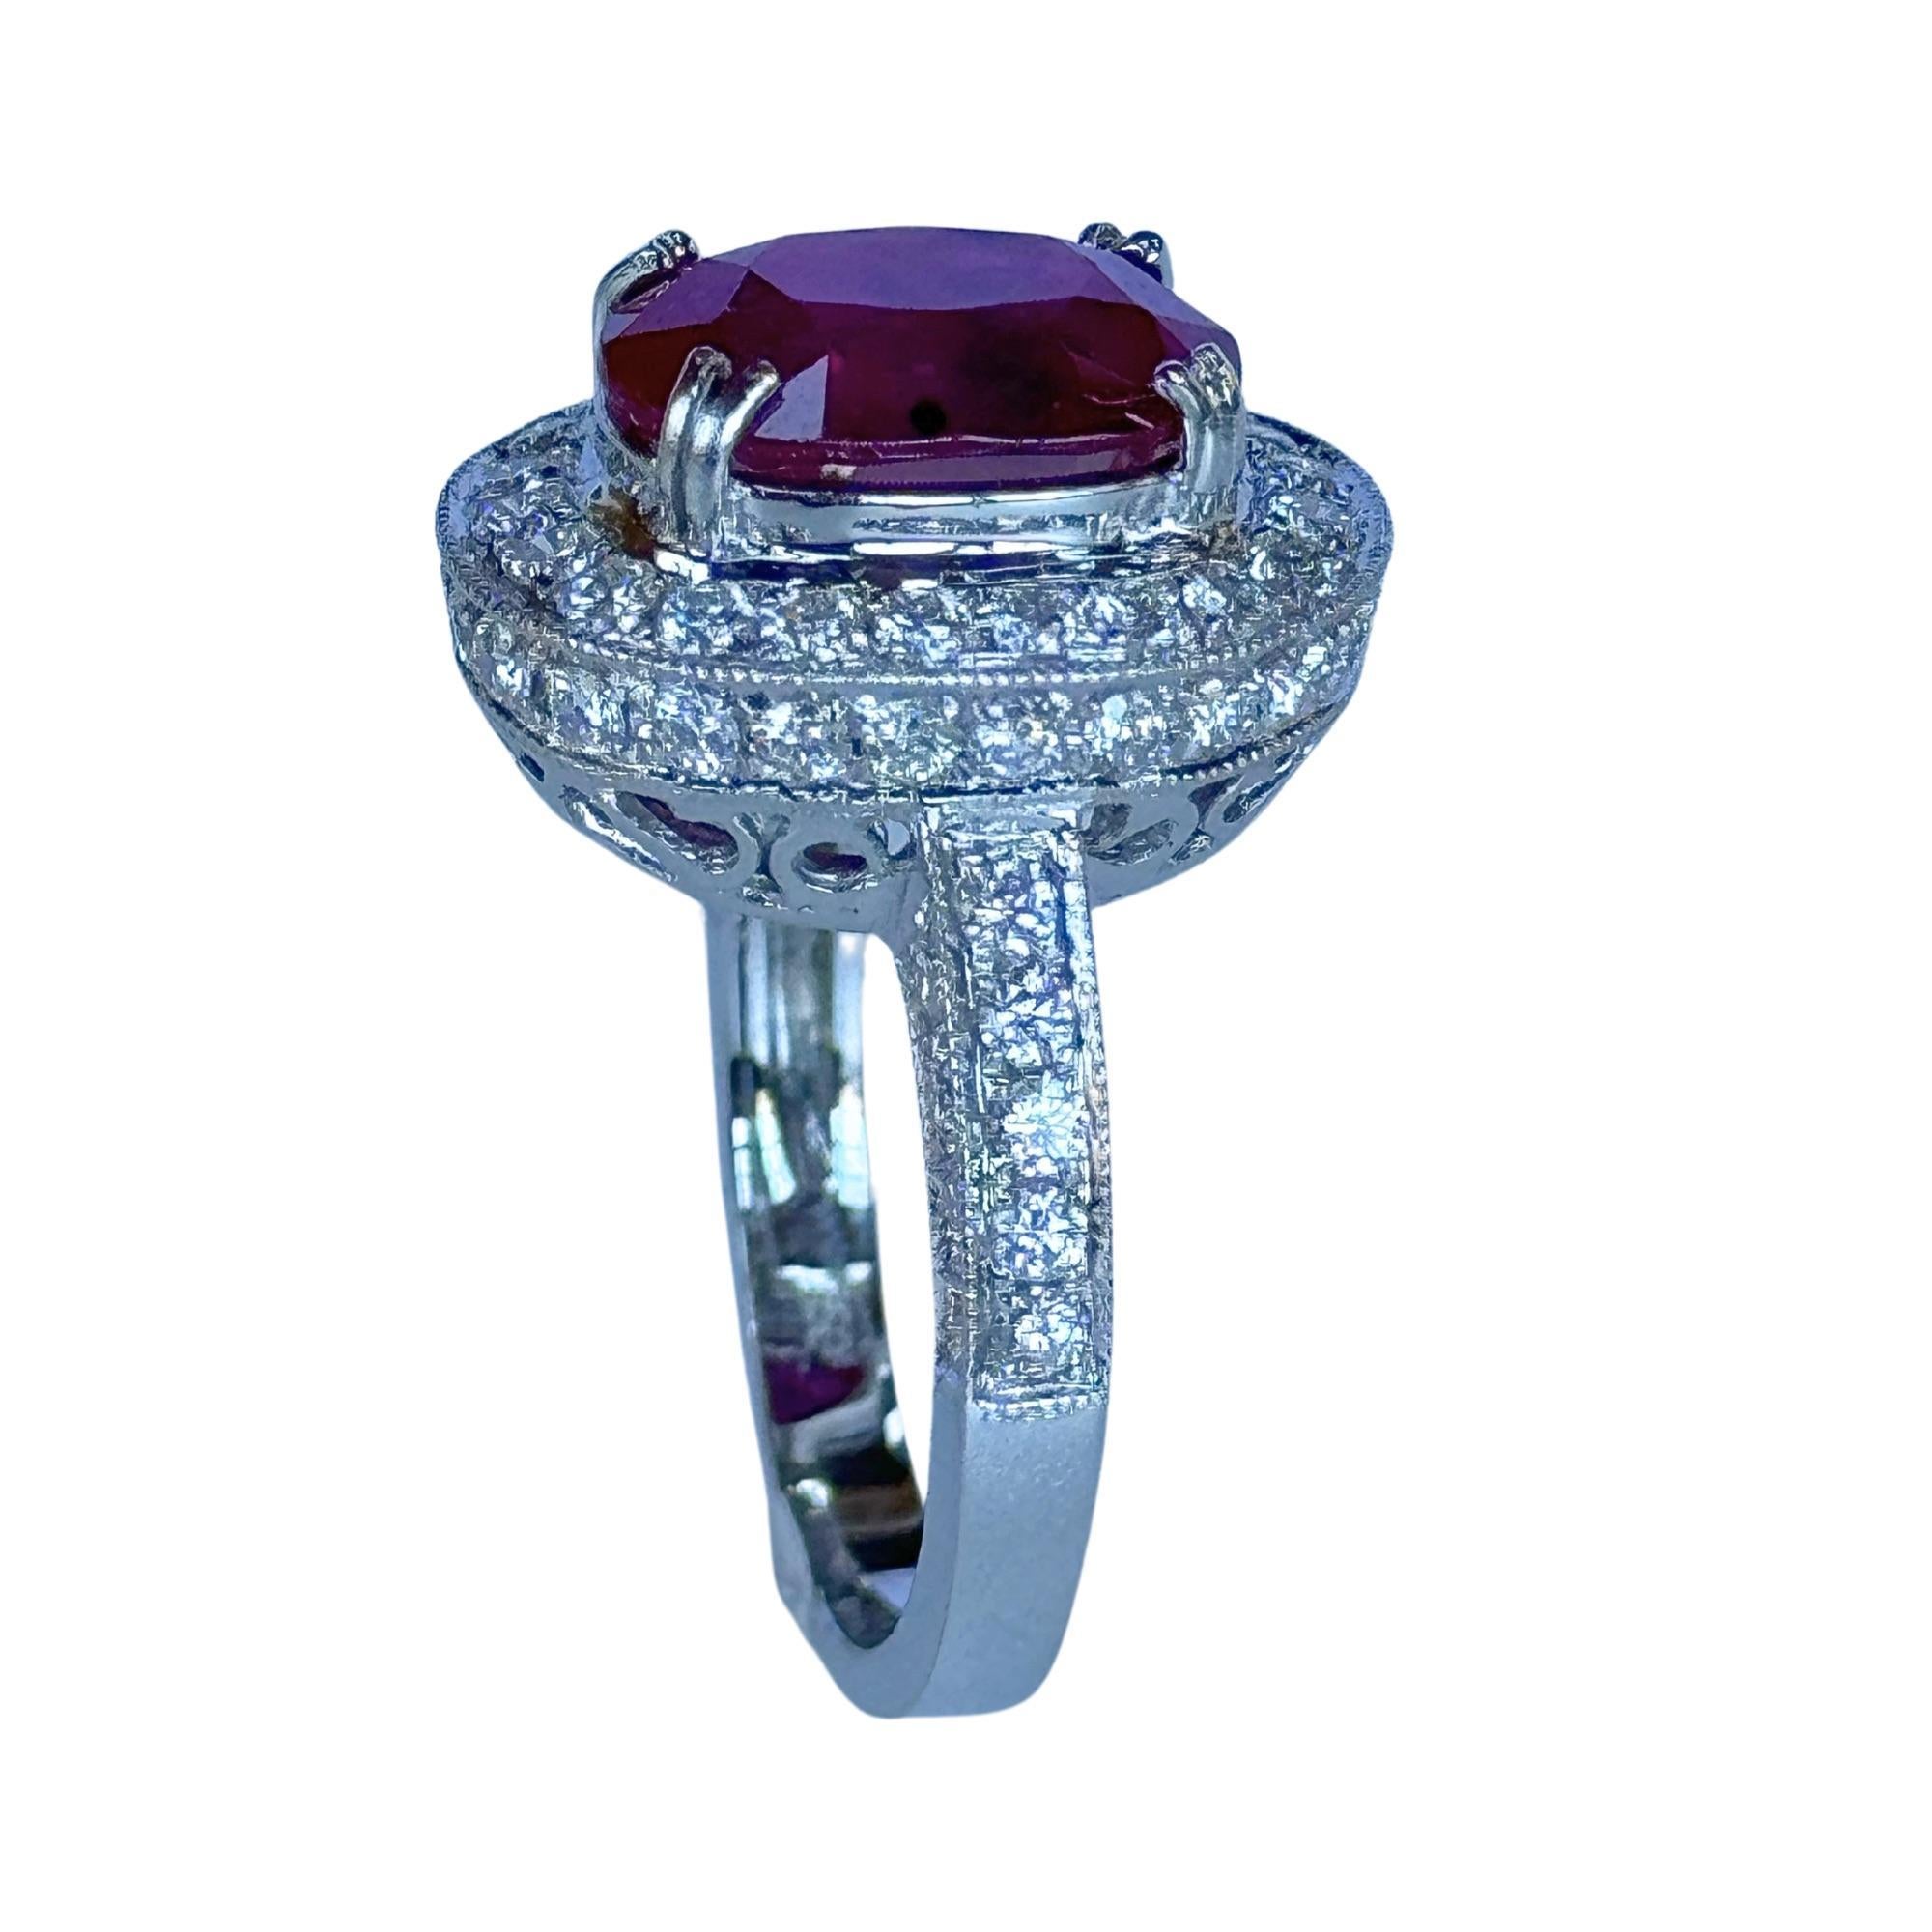 Indulge in the ultimate luxury with our 18k Diamond and Ruby Ring. Crafted with 18k white gold and adorned with 1.03 carats of sparkling diamonds around a 3.48 carat ruby, this ring is a true work of art. With a weight of 7.28 grams and a size of